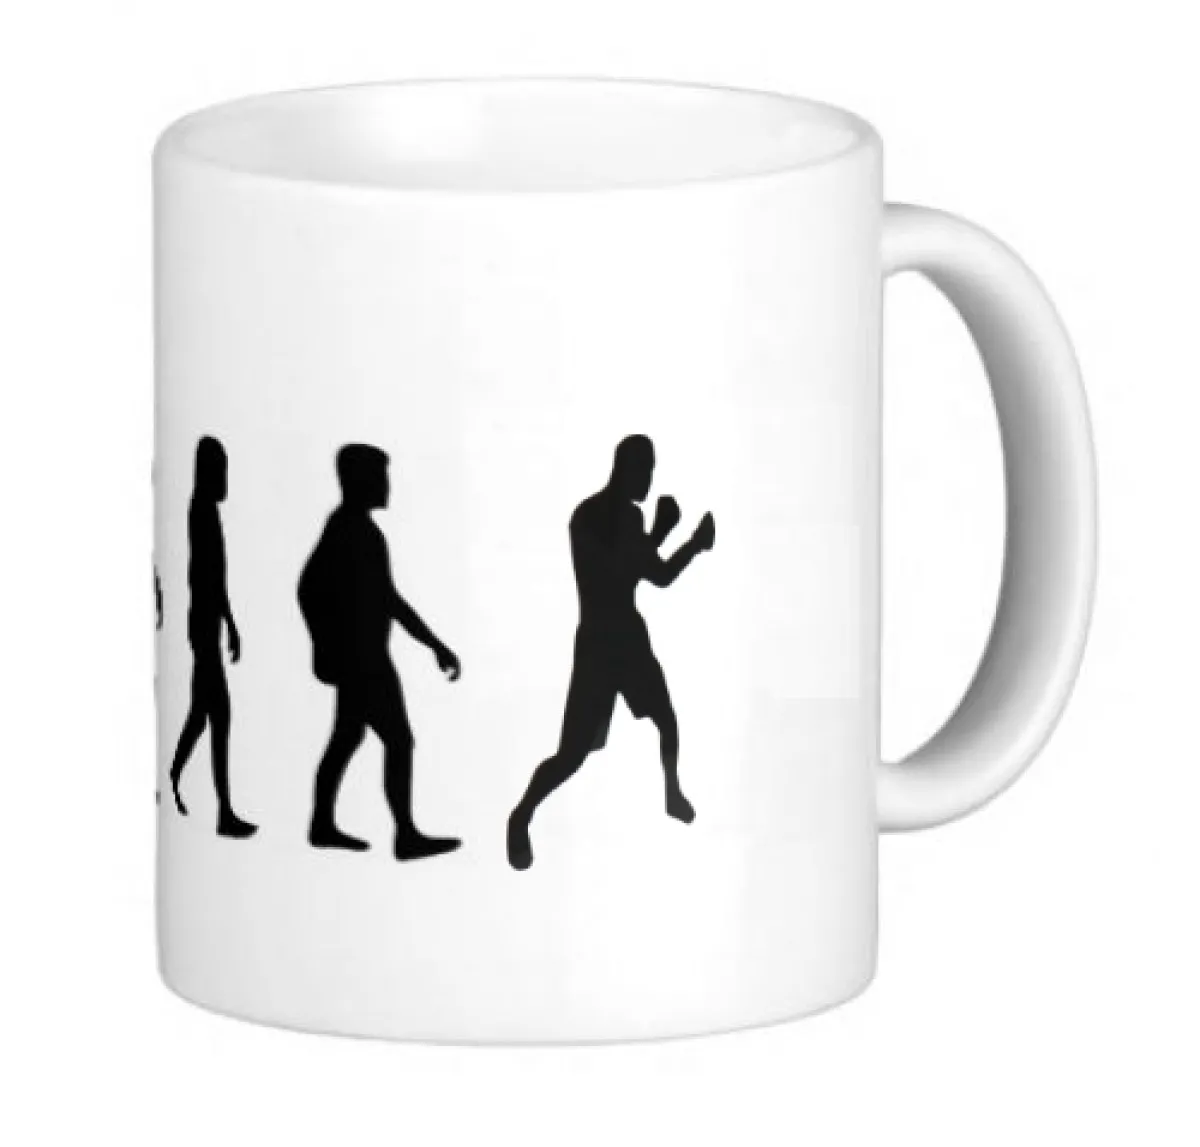 cup white printed with boxing evolution